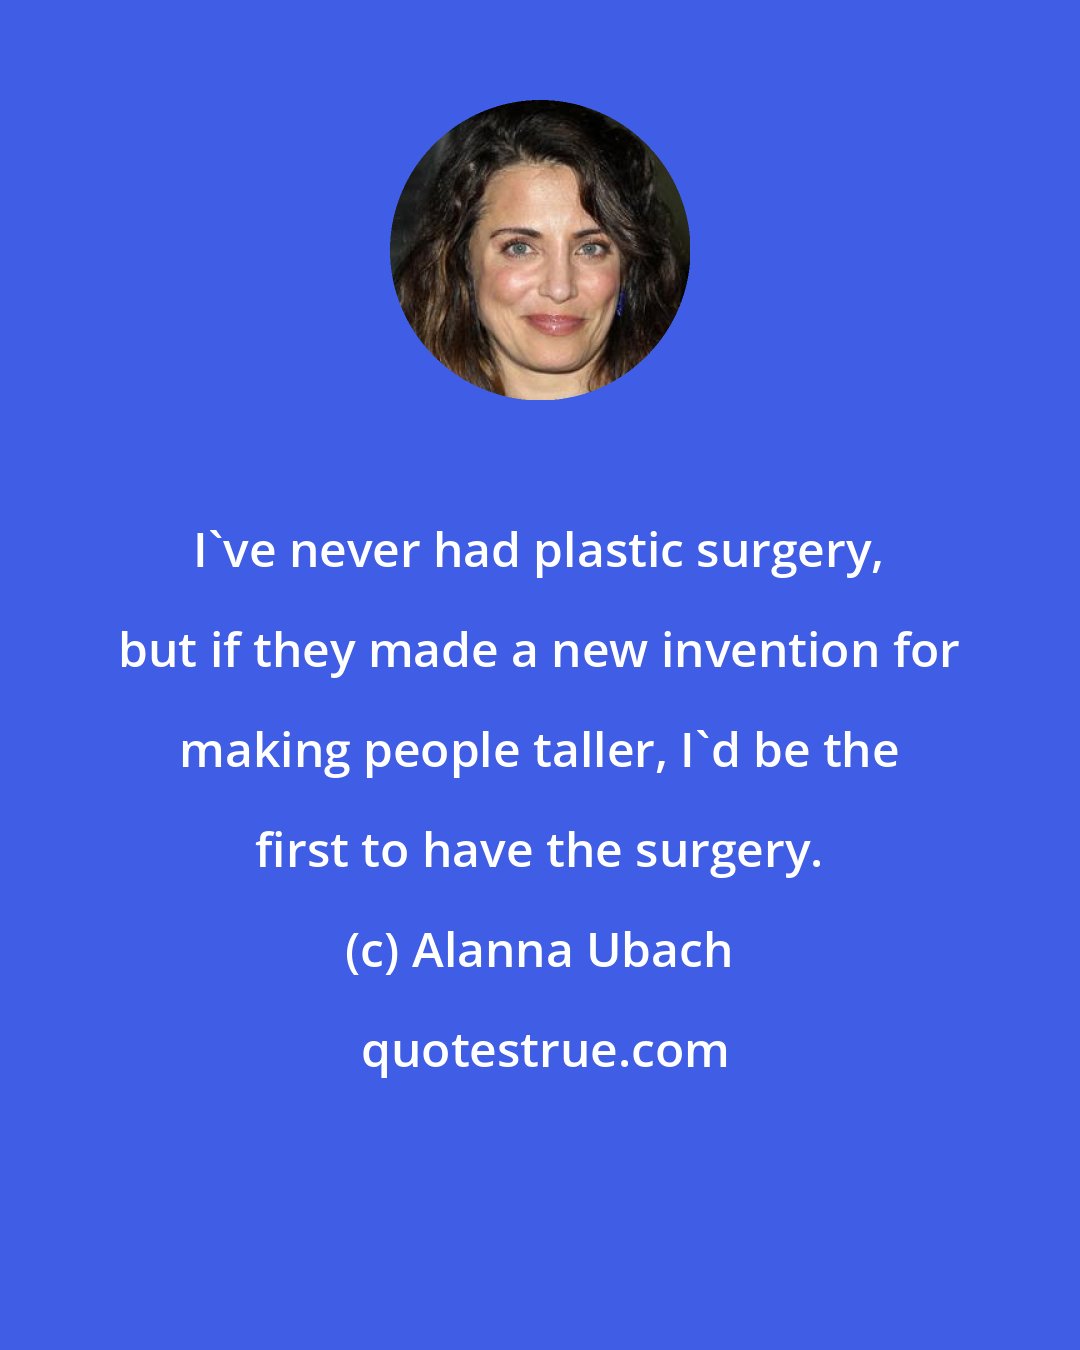 Alanna Ubach: I've never had plastic surgery, but if they made a new invention for making people taller, I'd be the first to have the surgery.